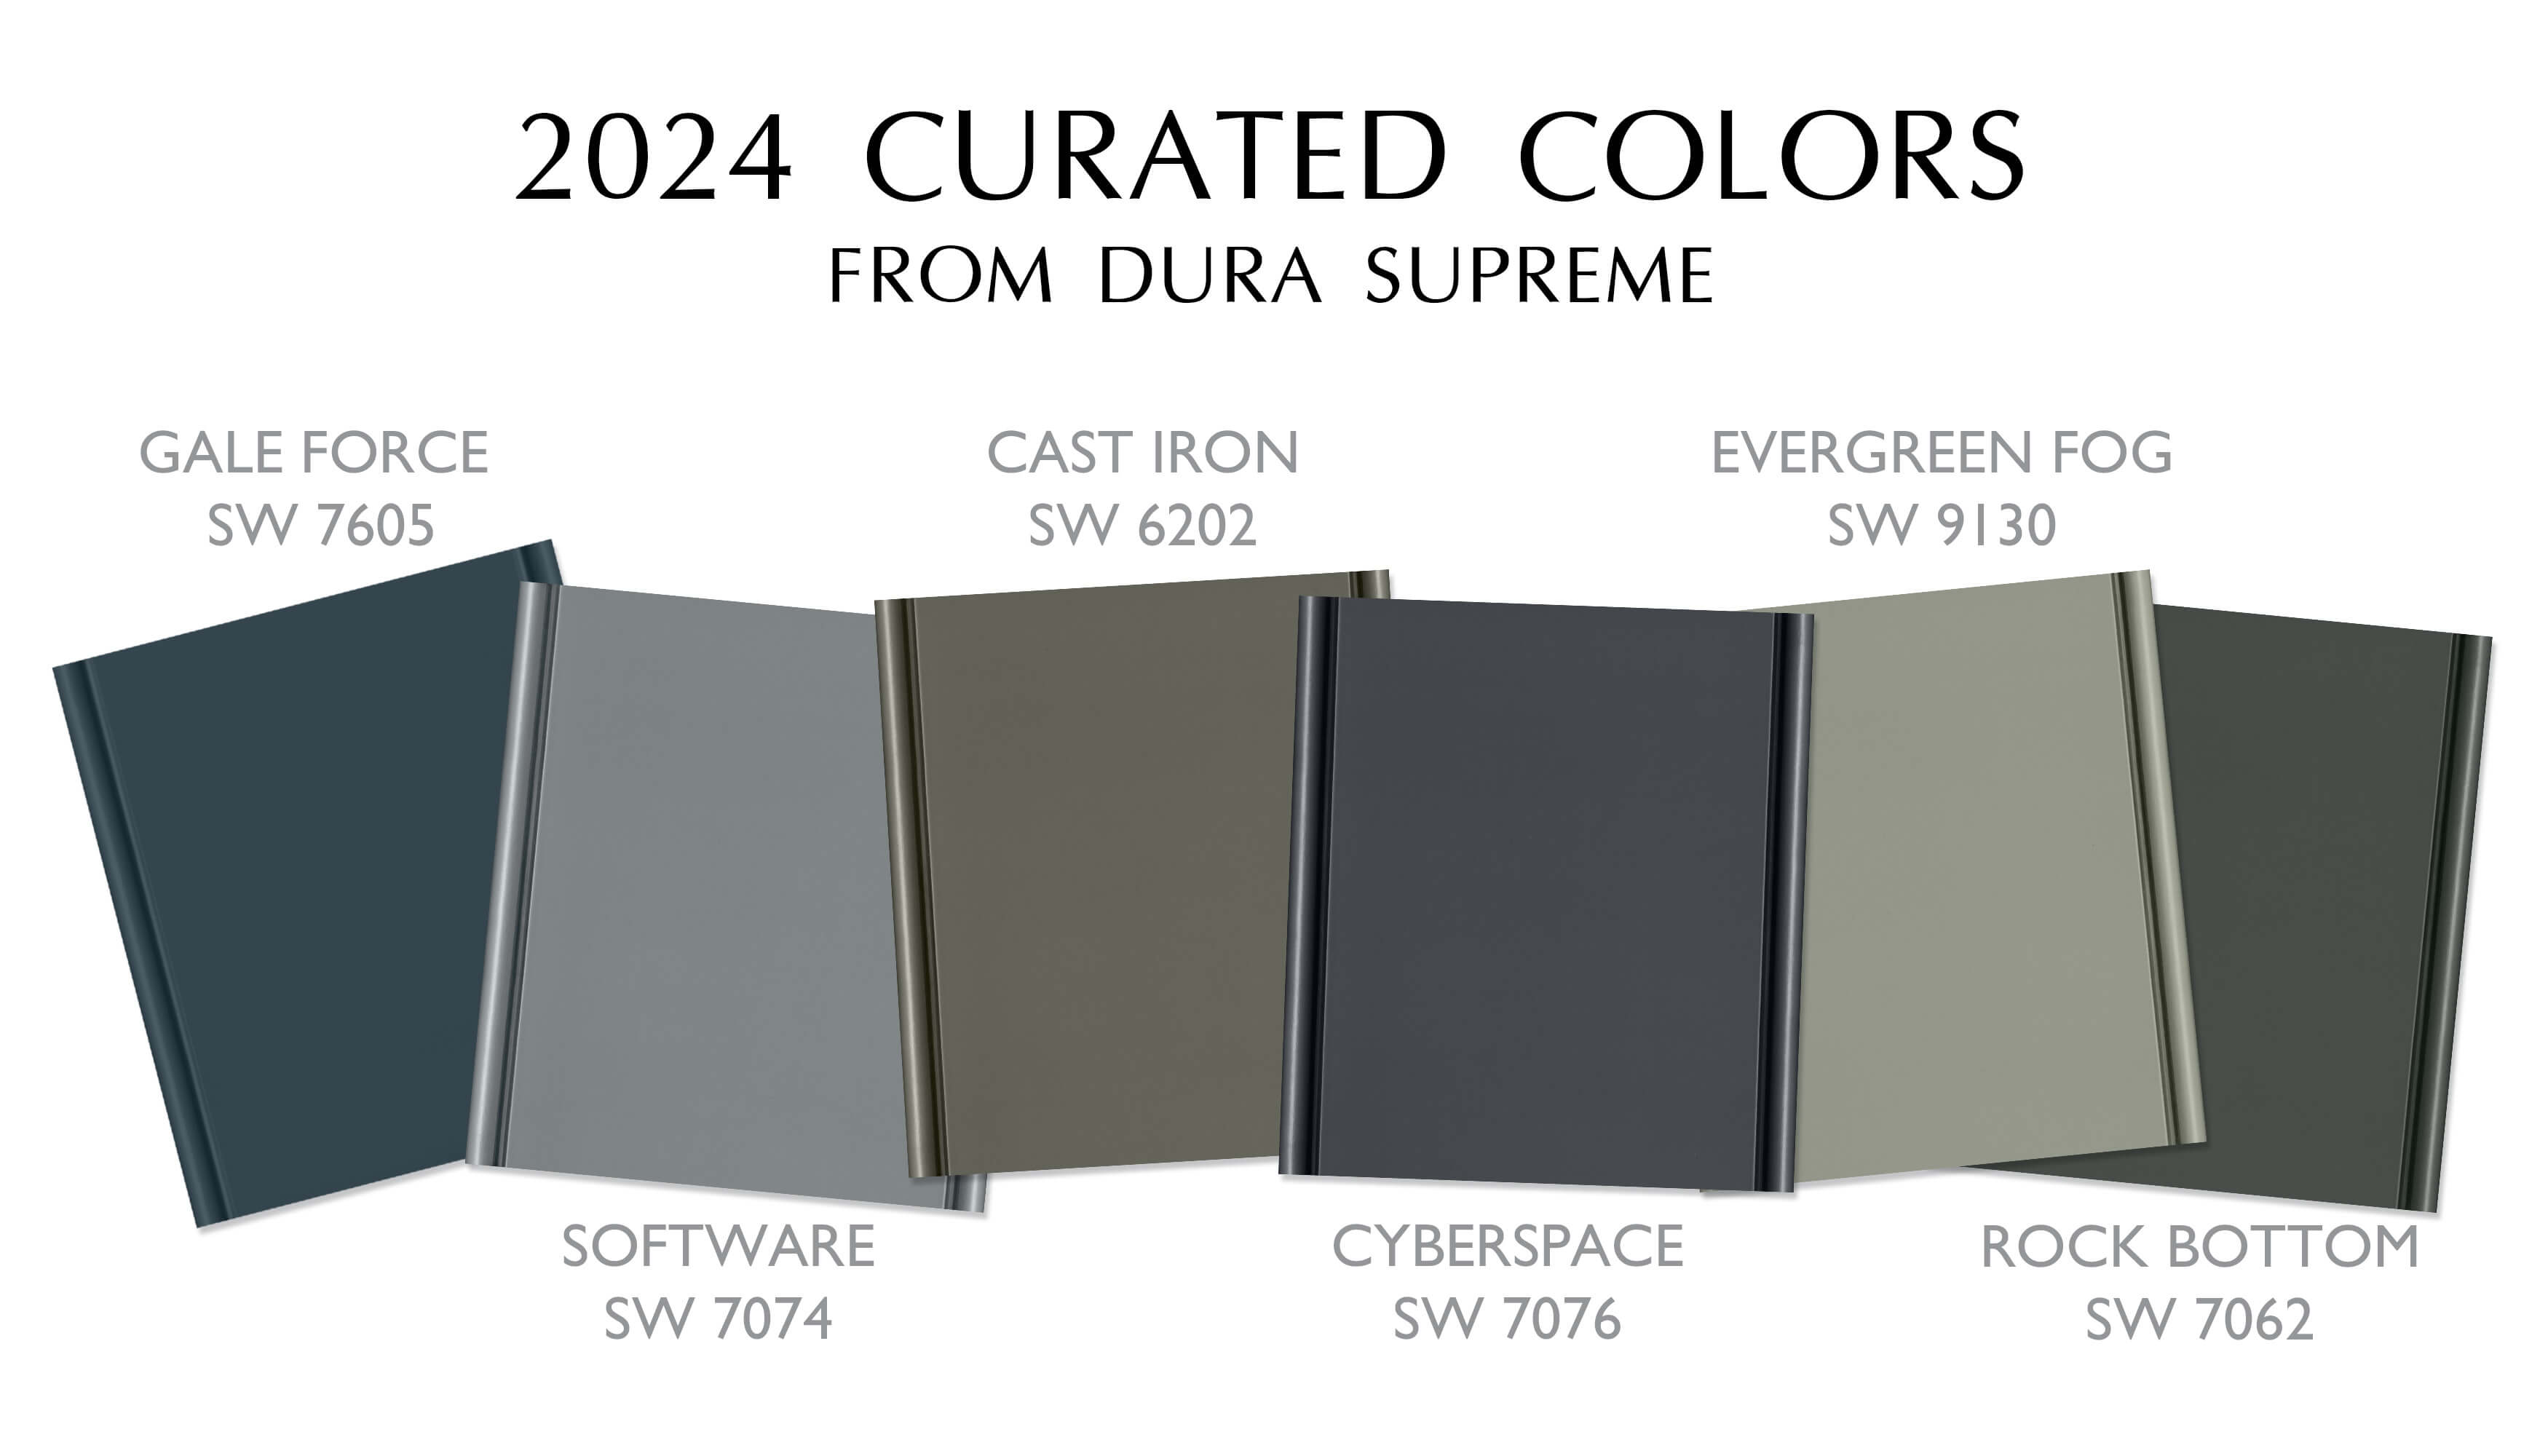 On Trend Curated Colors for kitchen and bath cabinets from Dura Supreme Cabinetry.